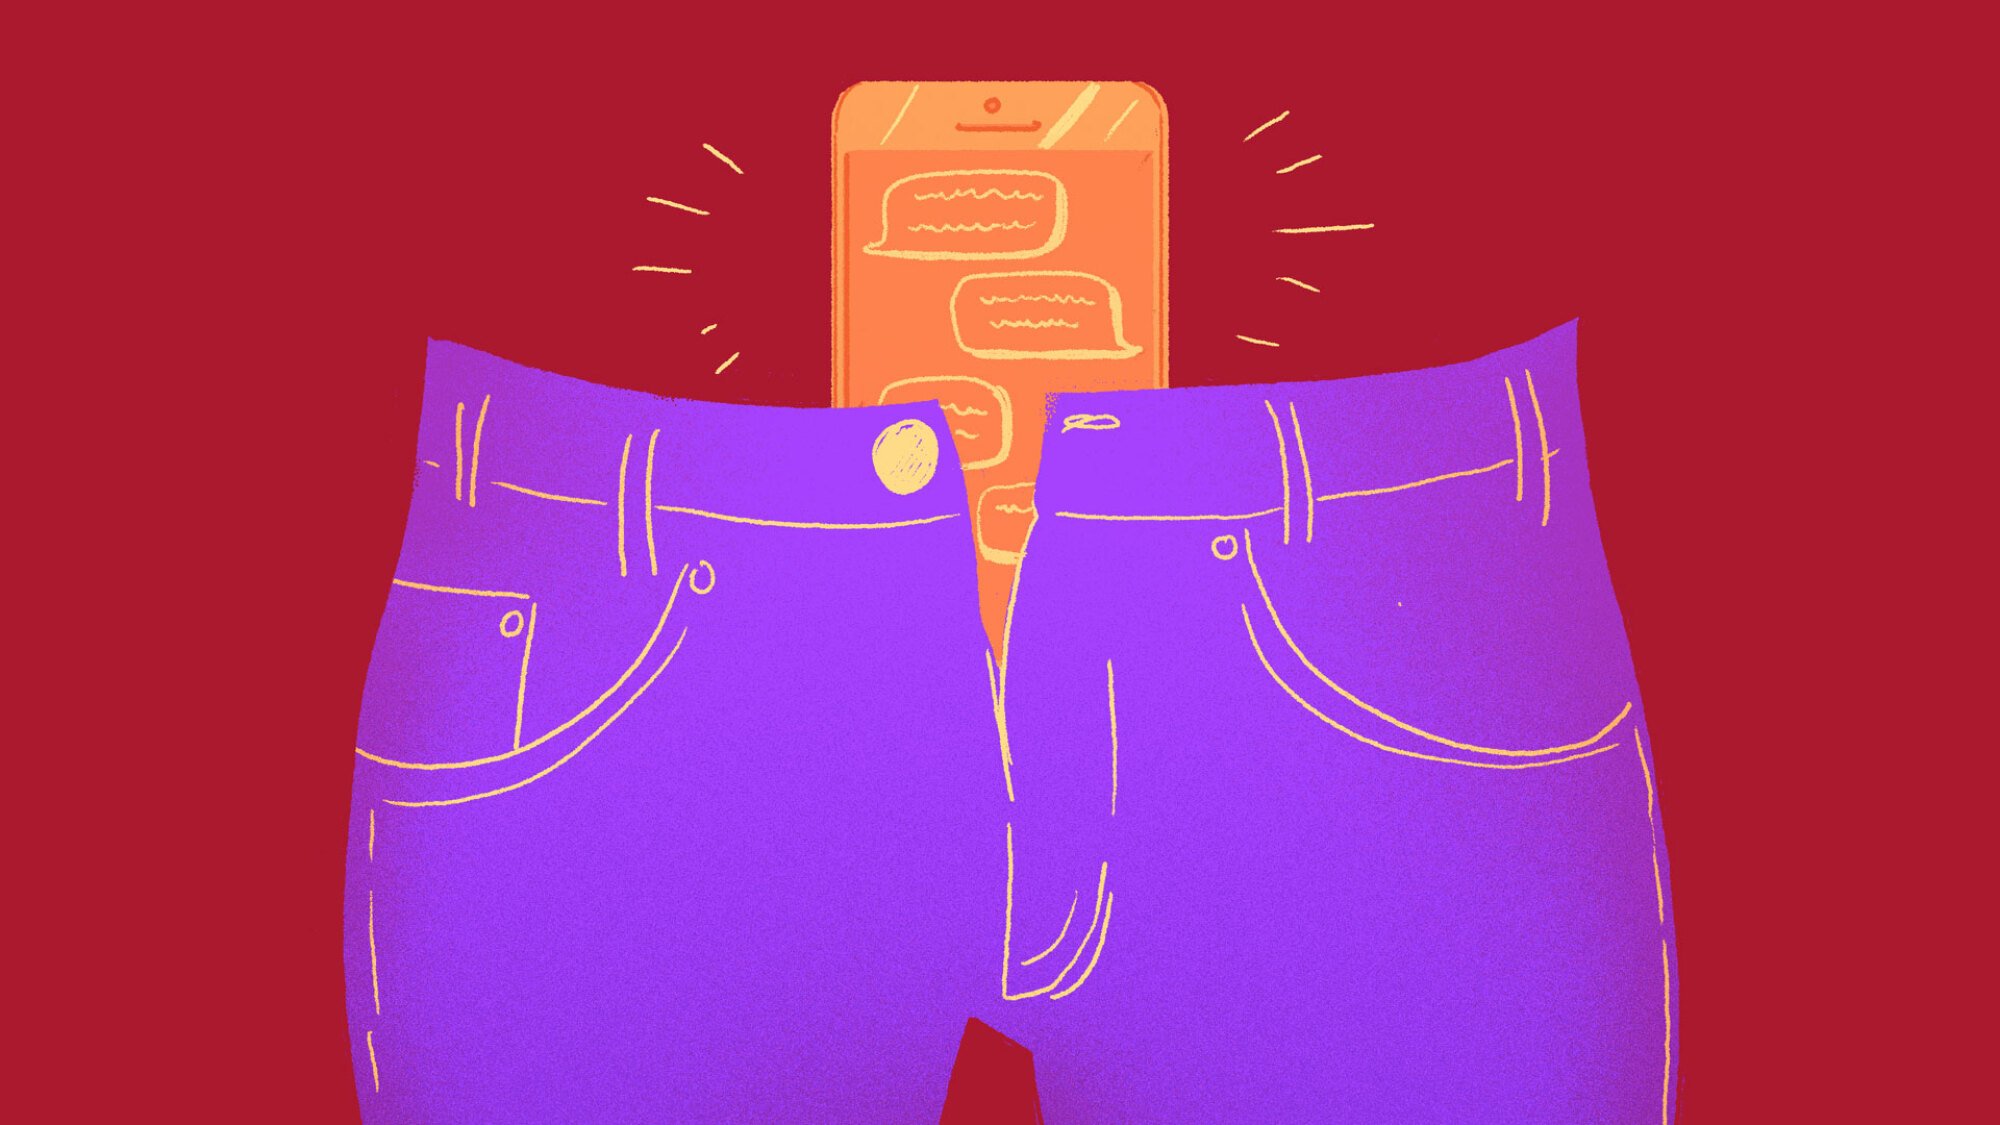 An illustration of a smartphone in a pair of jeans. The screen displays message bubbles.